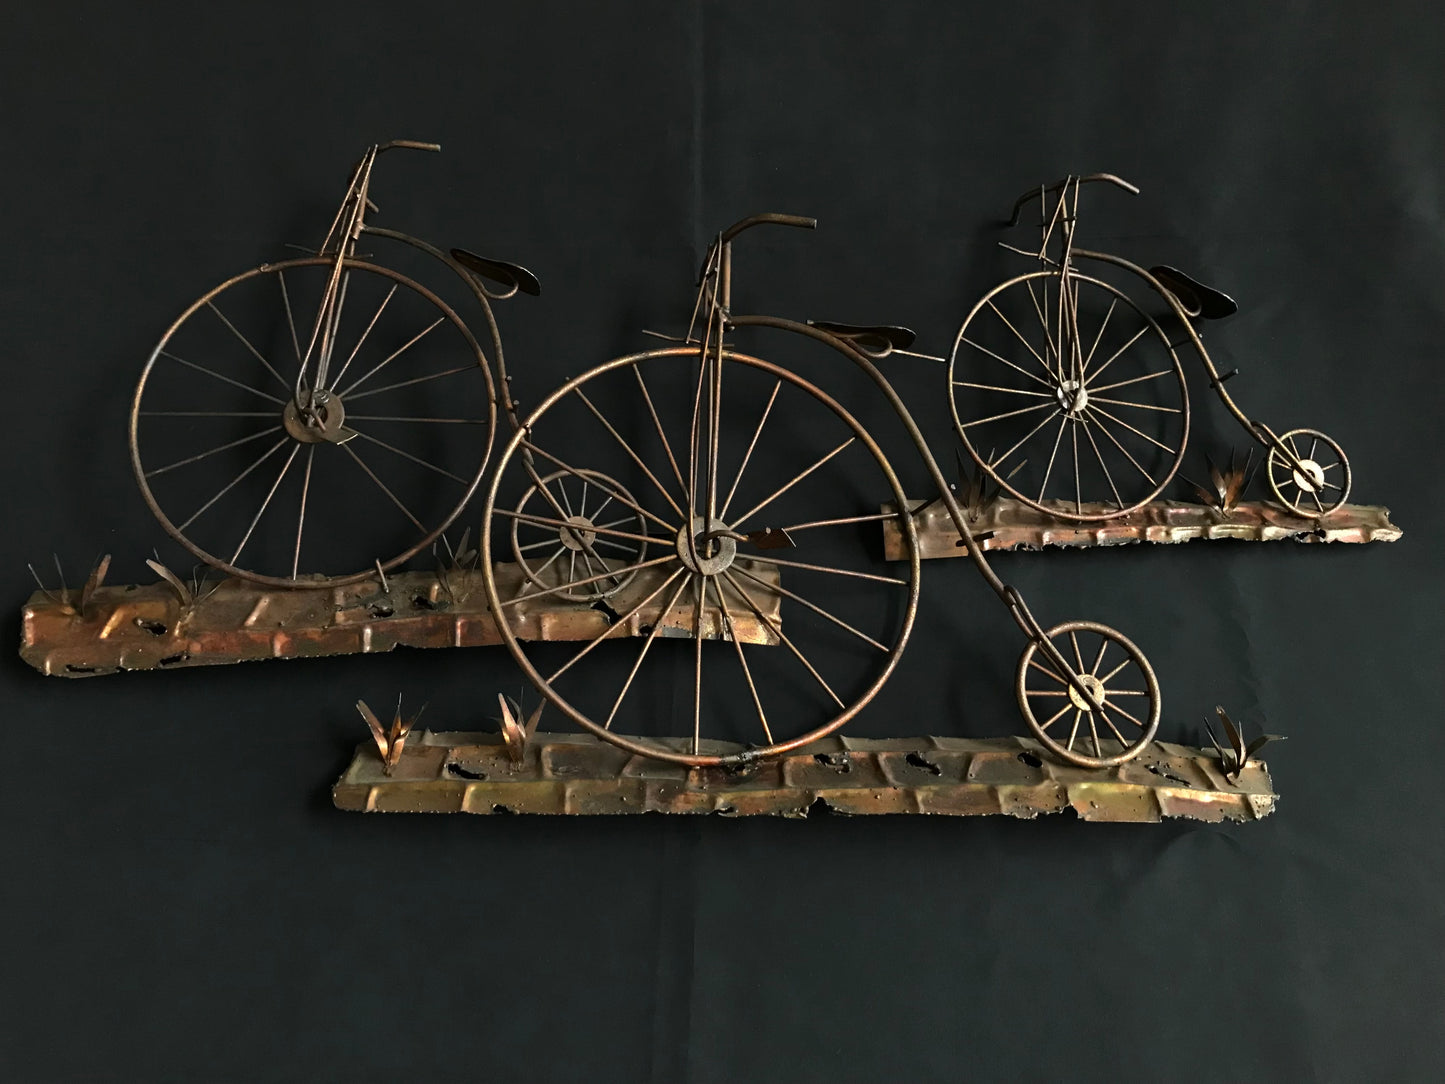 Curtis Jere Vintage Wall Sculpture of Penny Farthing Bicycles